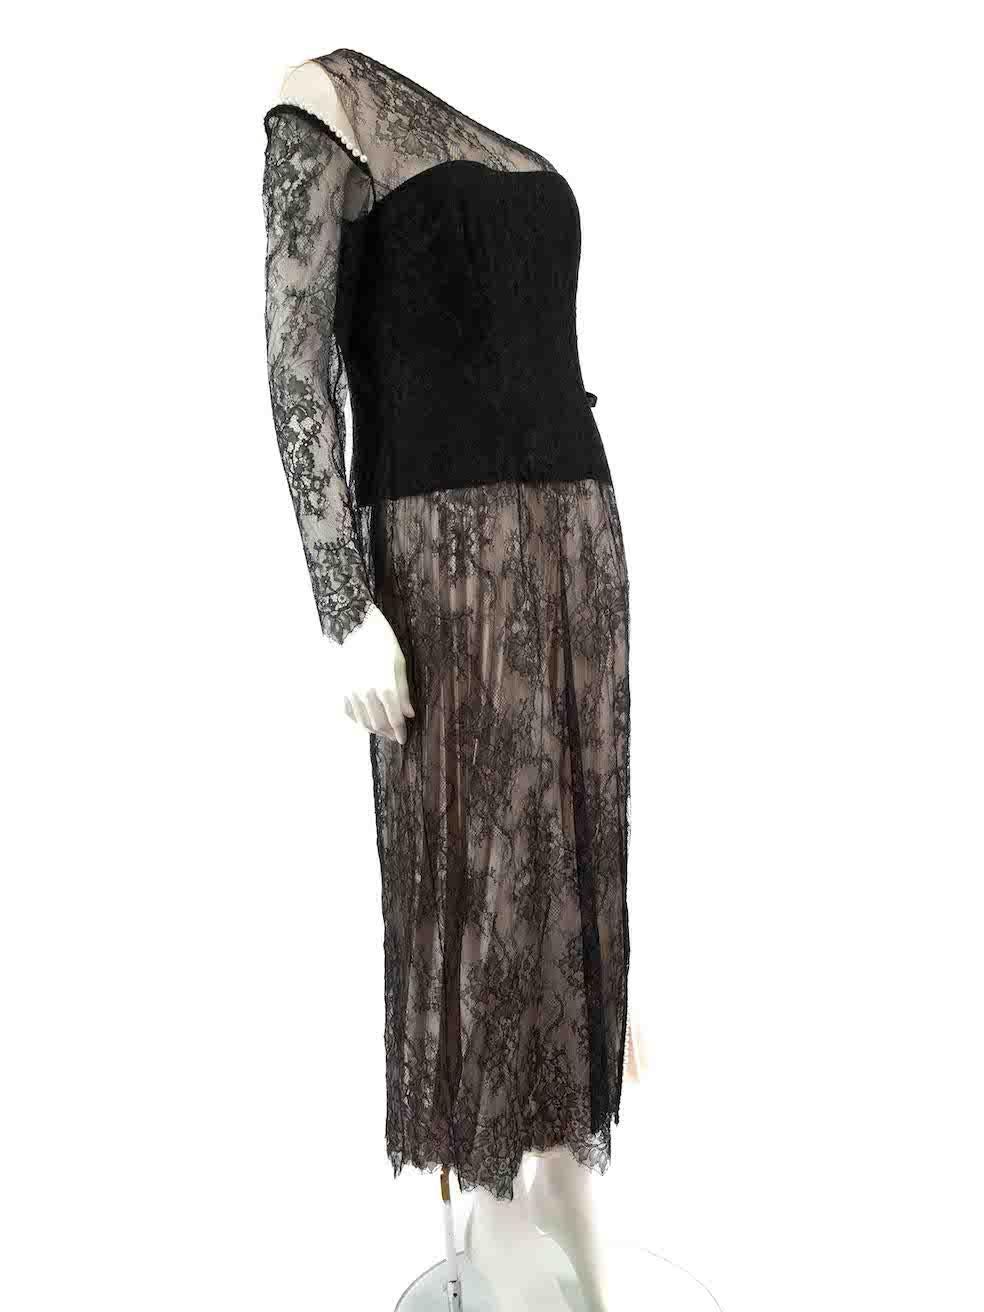 CONDITION is Very good. Minimal wear to dress is evident. Minimal wear to one ribbon where it is frayed at the stitching on this used Honayda designer resale item.
 
 
 
 Details
 
 
 Black
 
 Lace
 
 Long top
 
 Sheer
 
 One shoulder
 
 Long